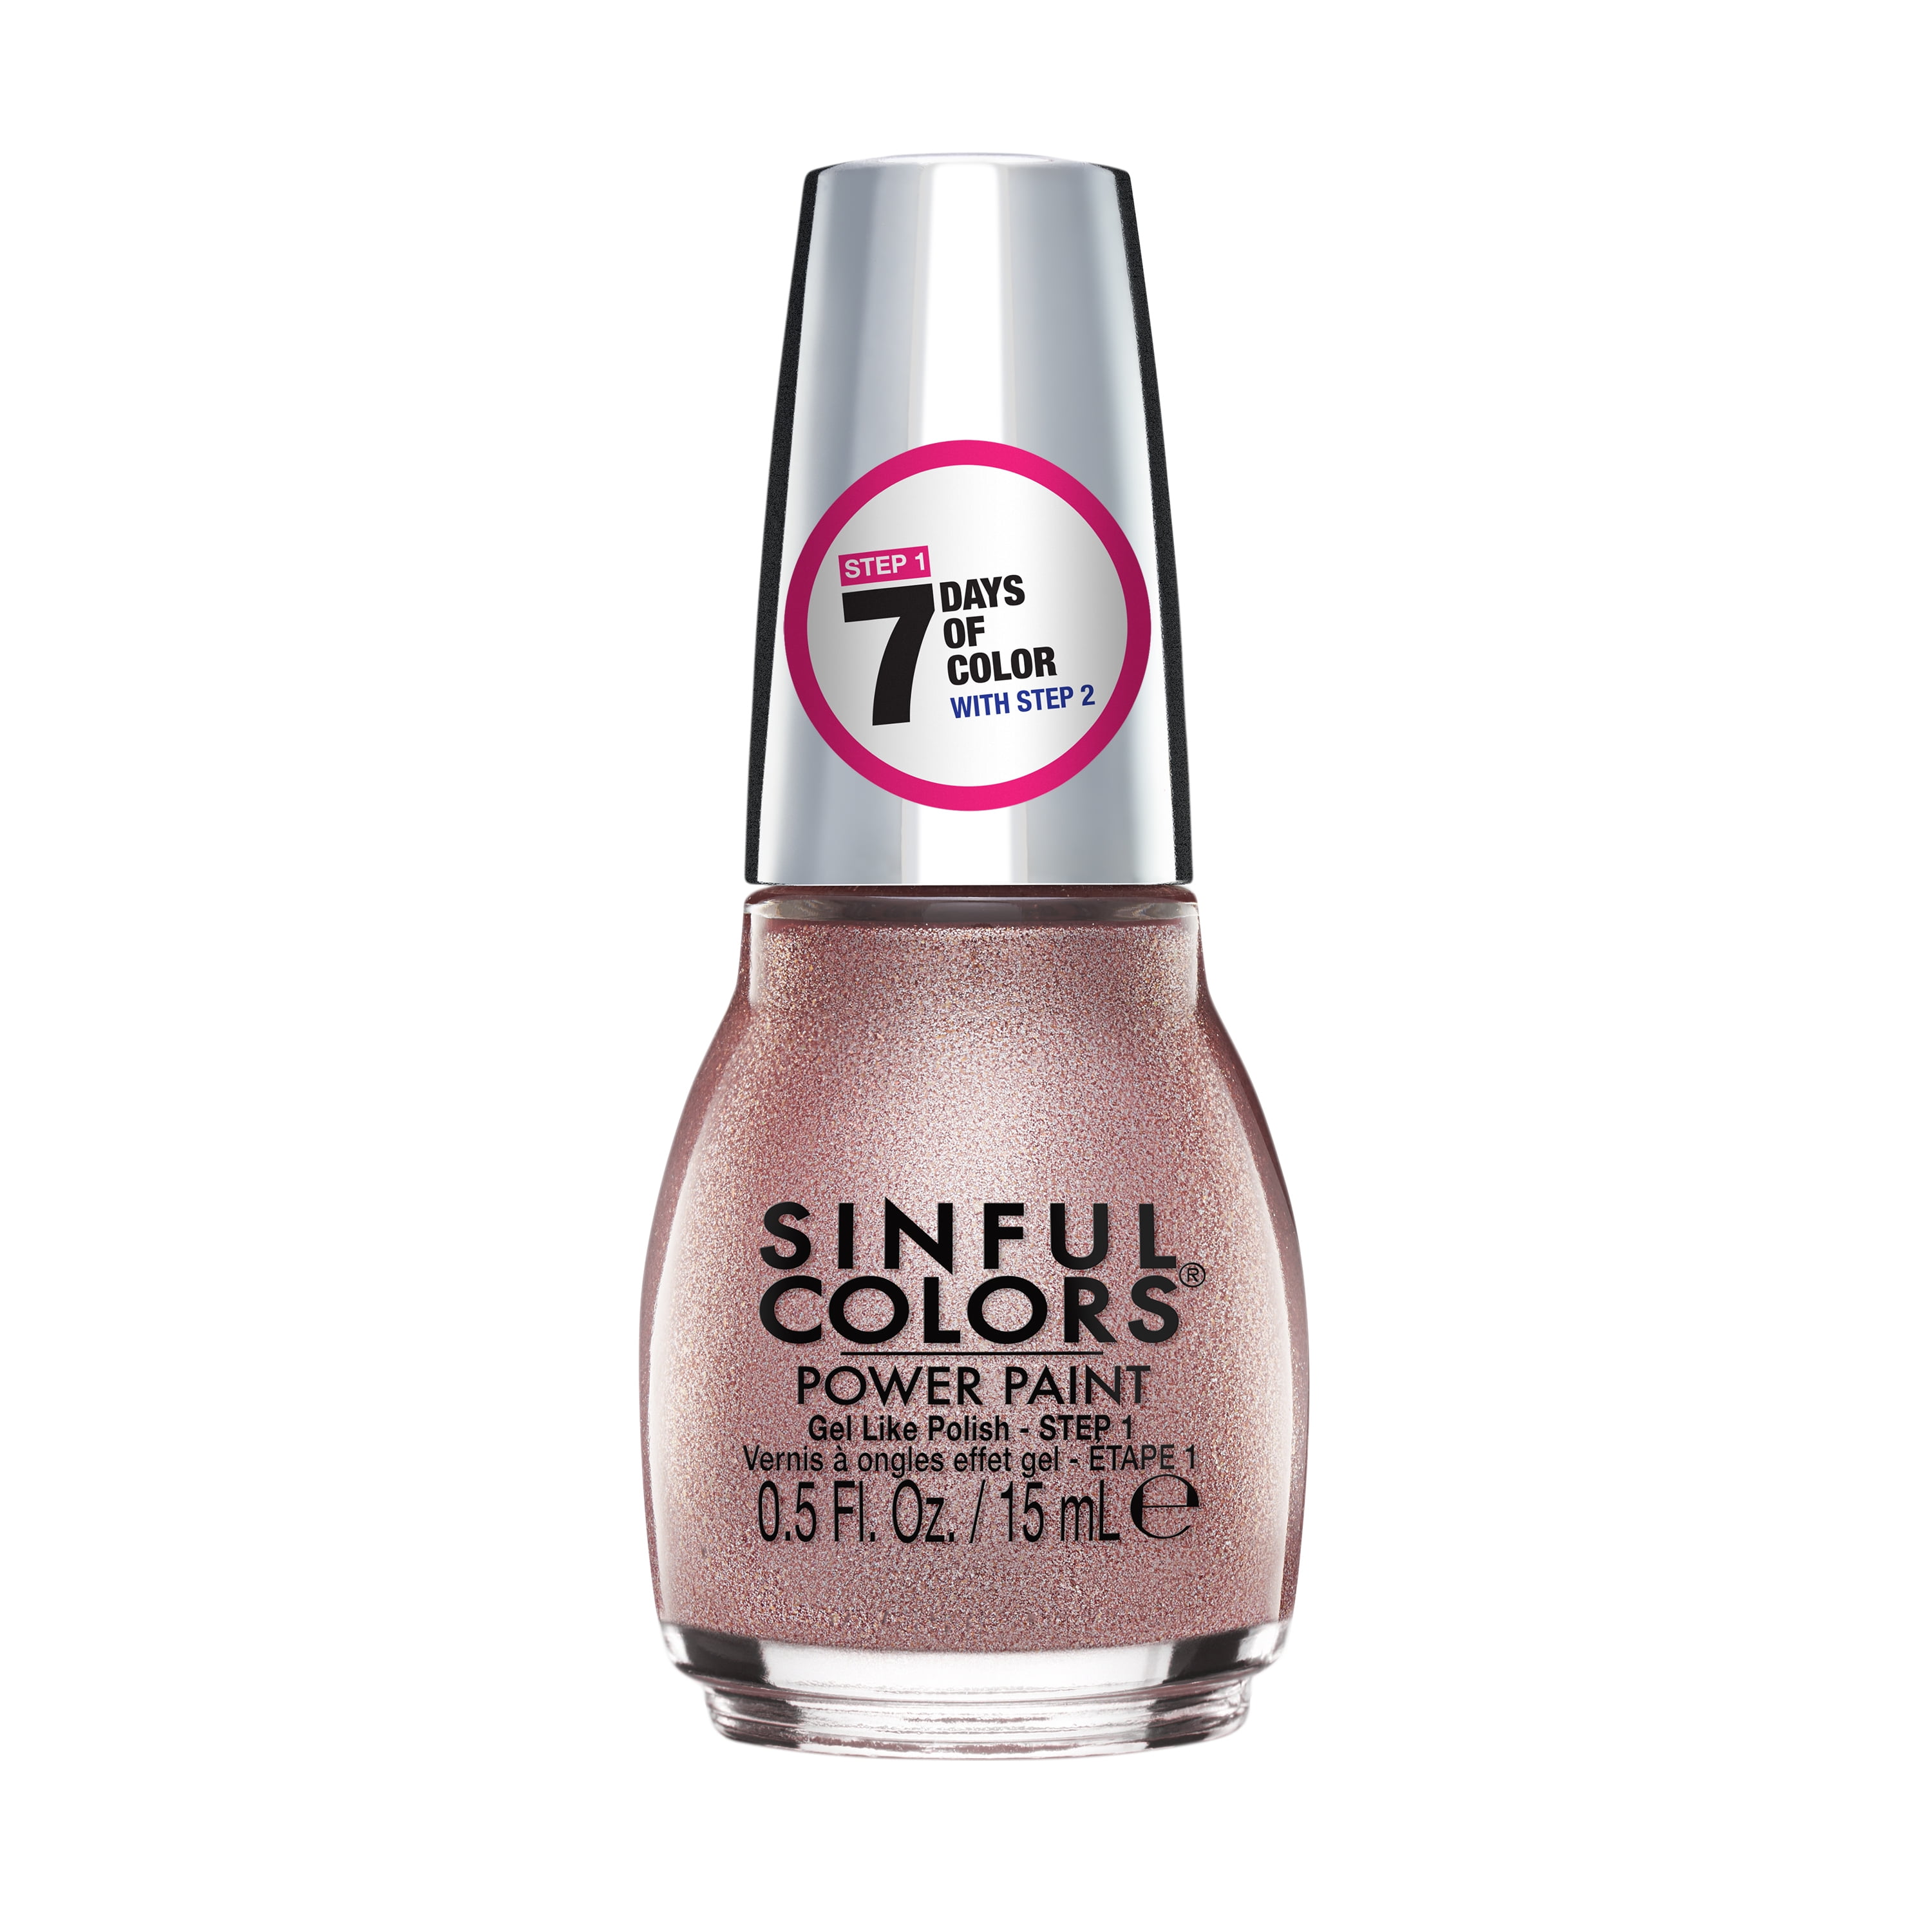 Irreplaceable Arena hat Sinful Colors Power Paint Nail Polish, 2646 Thrilled, 0.5 fl oz. -  Walmart.com